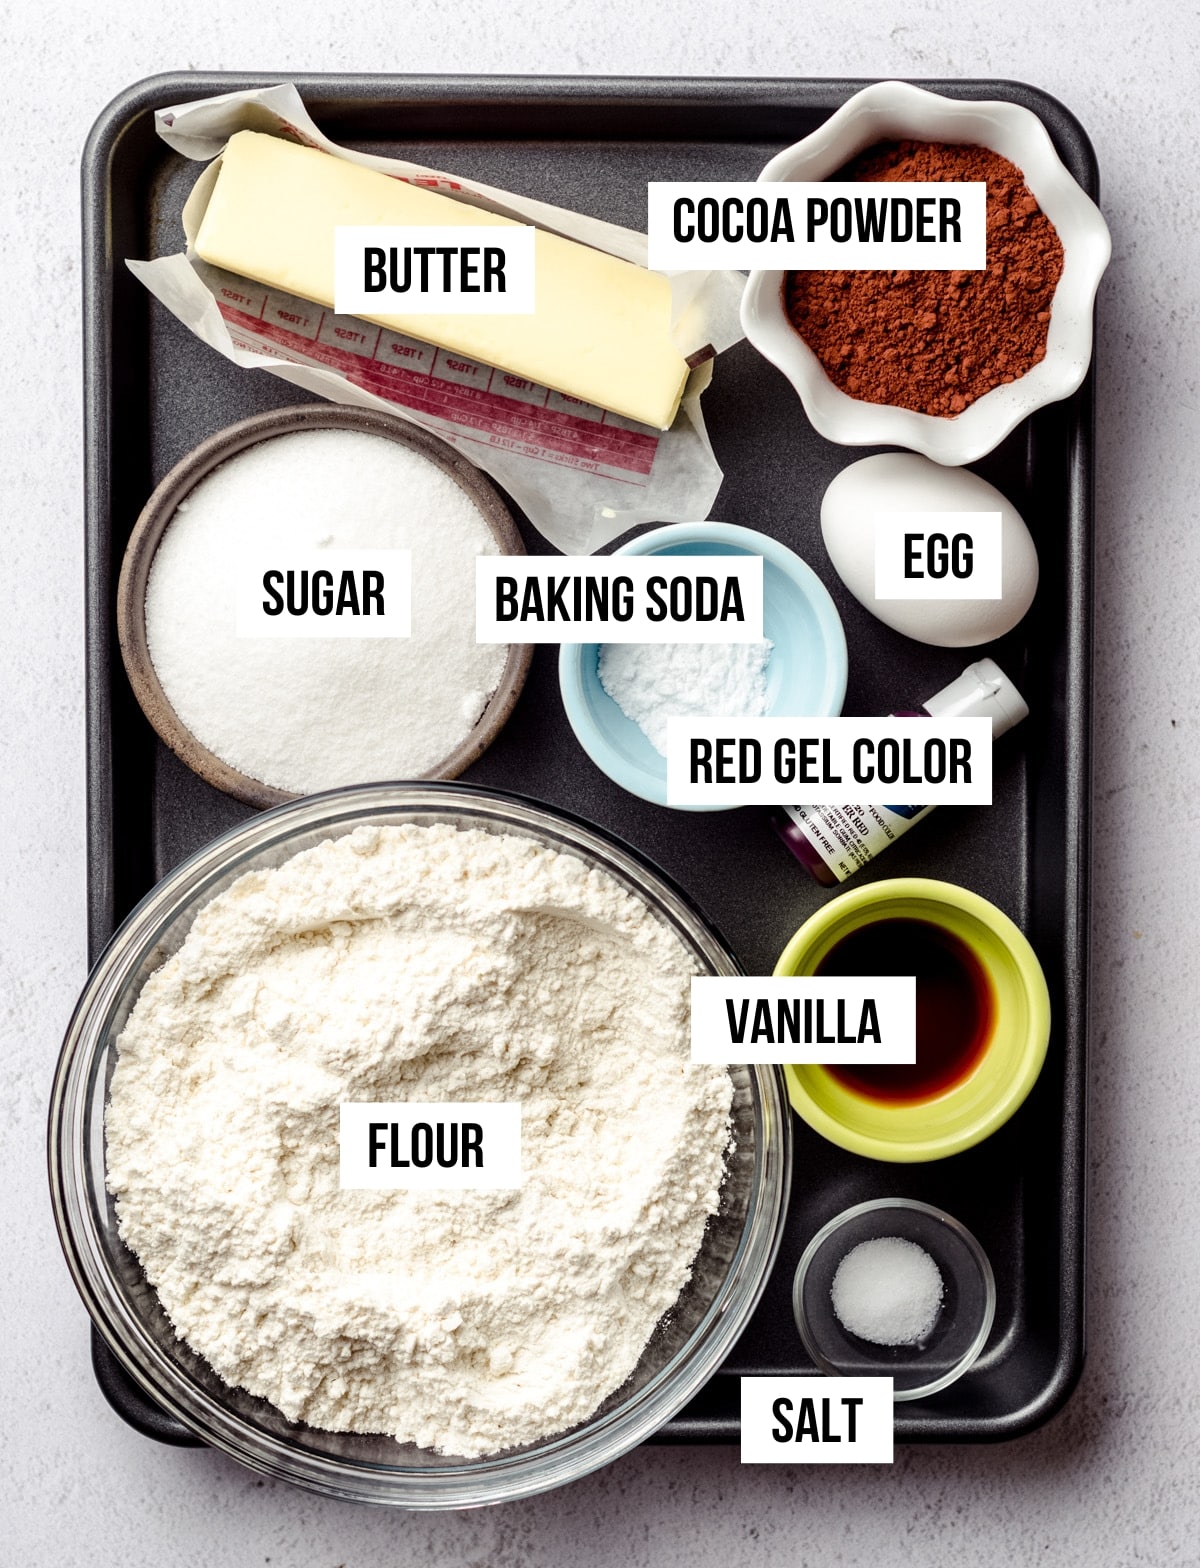 All the ingredients required for this recipe. There is a stick of butter, cocoa powder, a bowl of white sugar, a small bowl of baking soda, an egg, some red food gel color, vanilla, salt and a large glass bowl of flour.